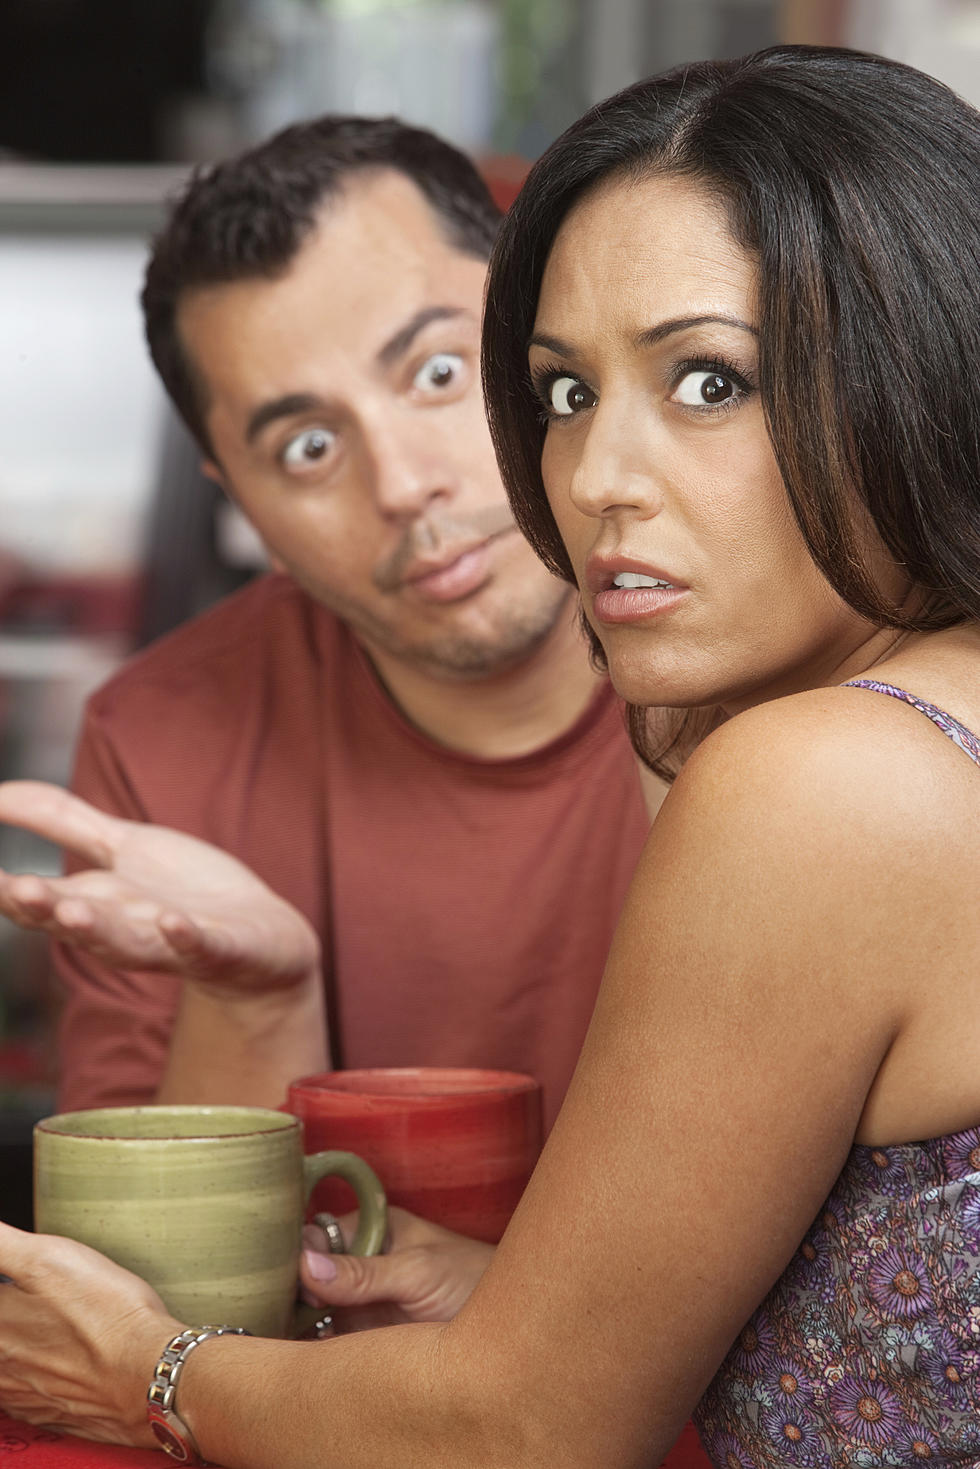 The Average Couple Spends 132 Hours A Year Deciding What To Eat